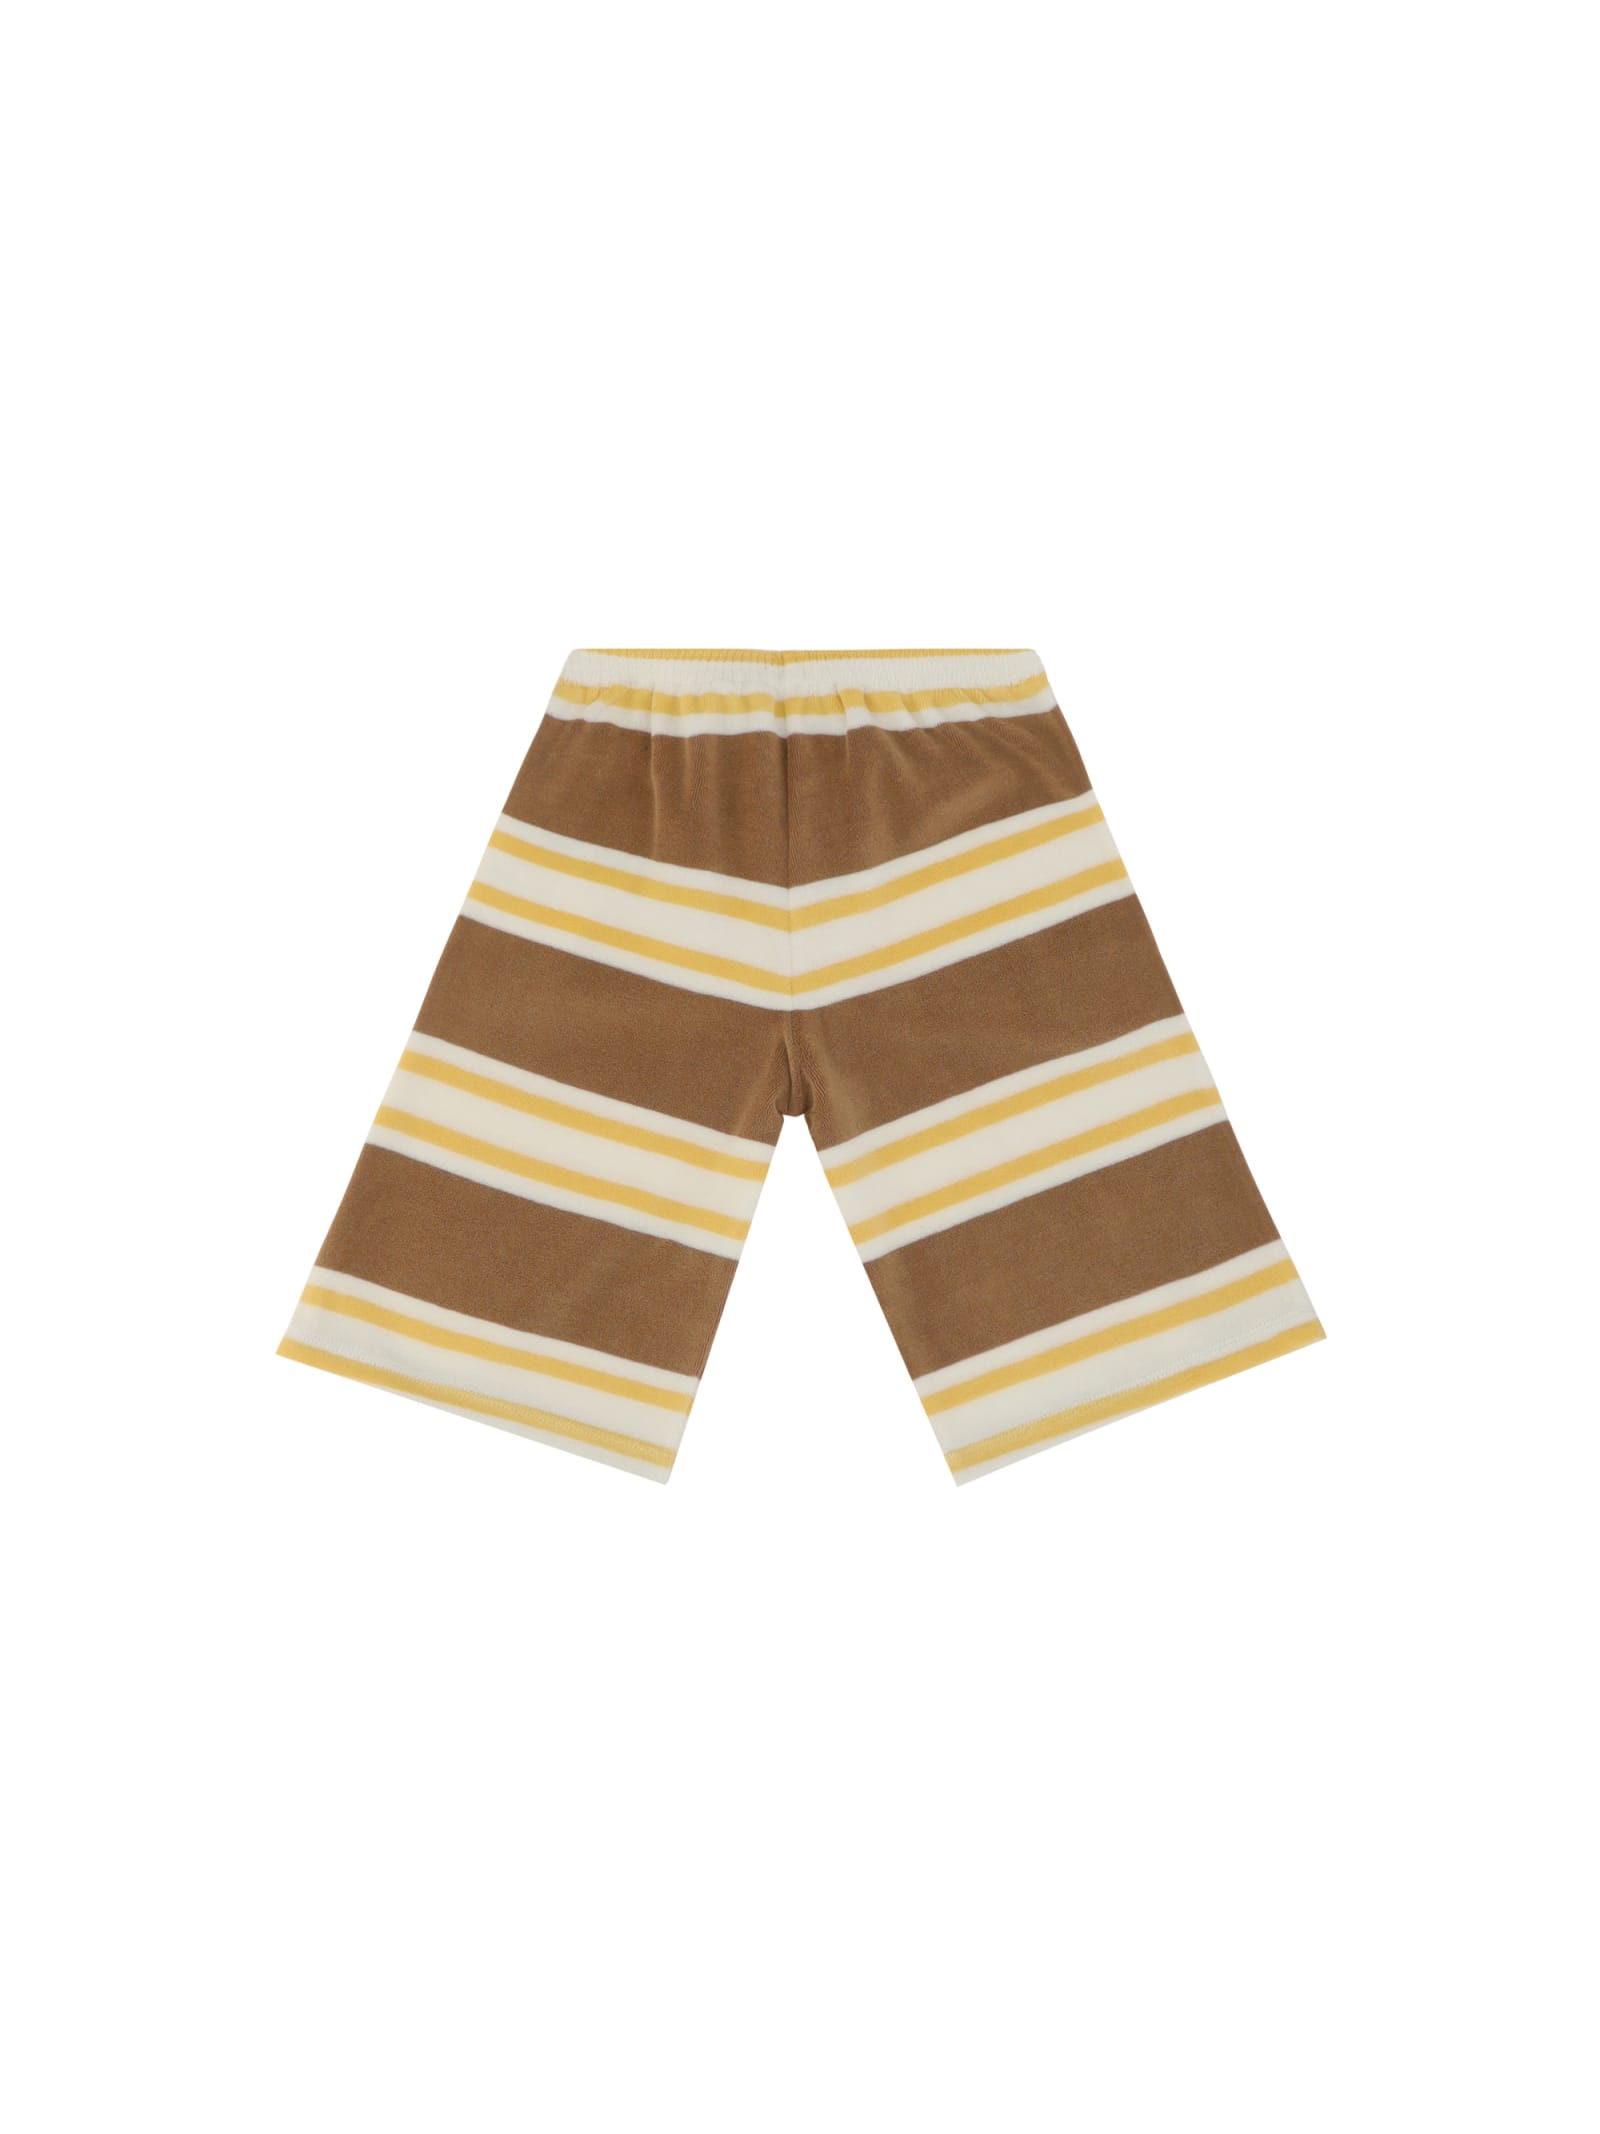 Shop Gucci Shorts For Boy In Yellow/brown